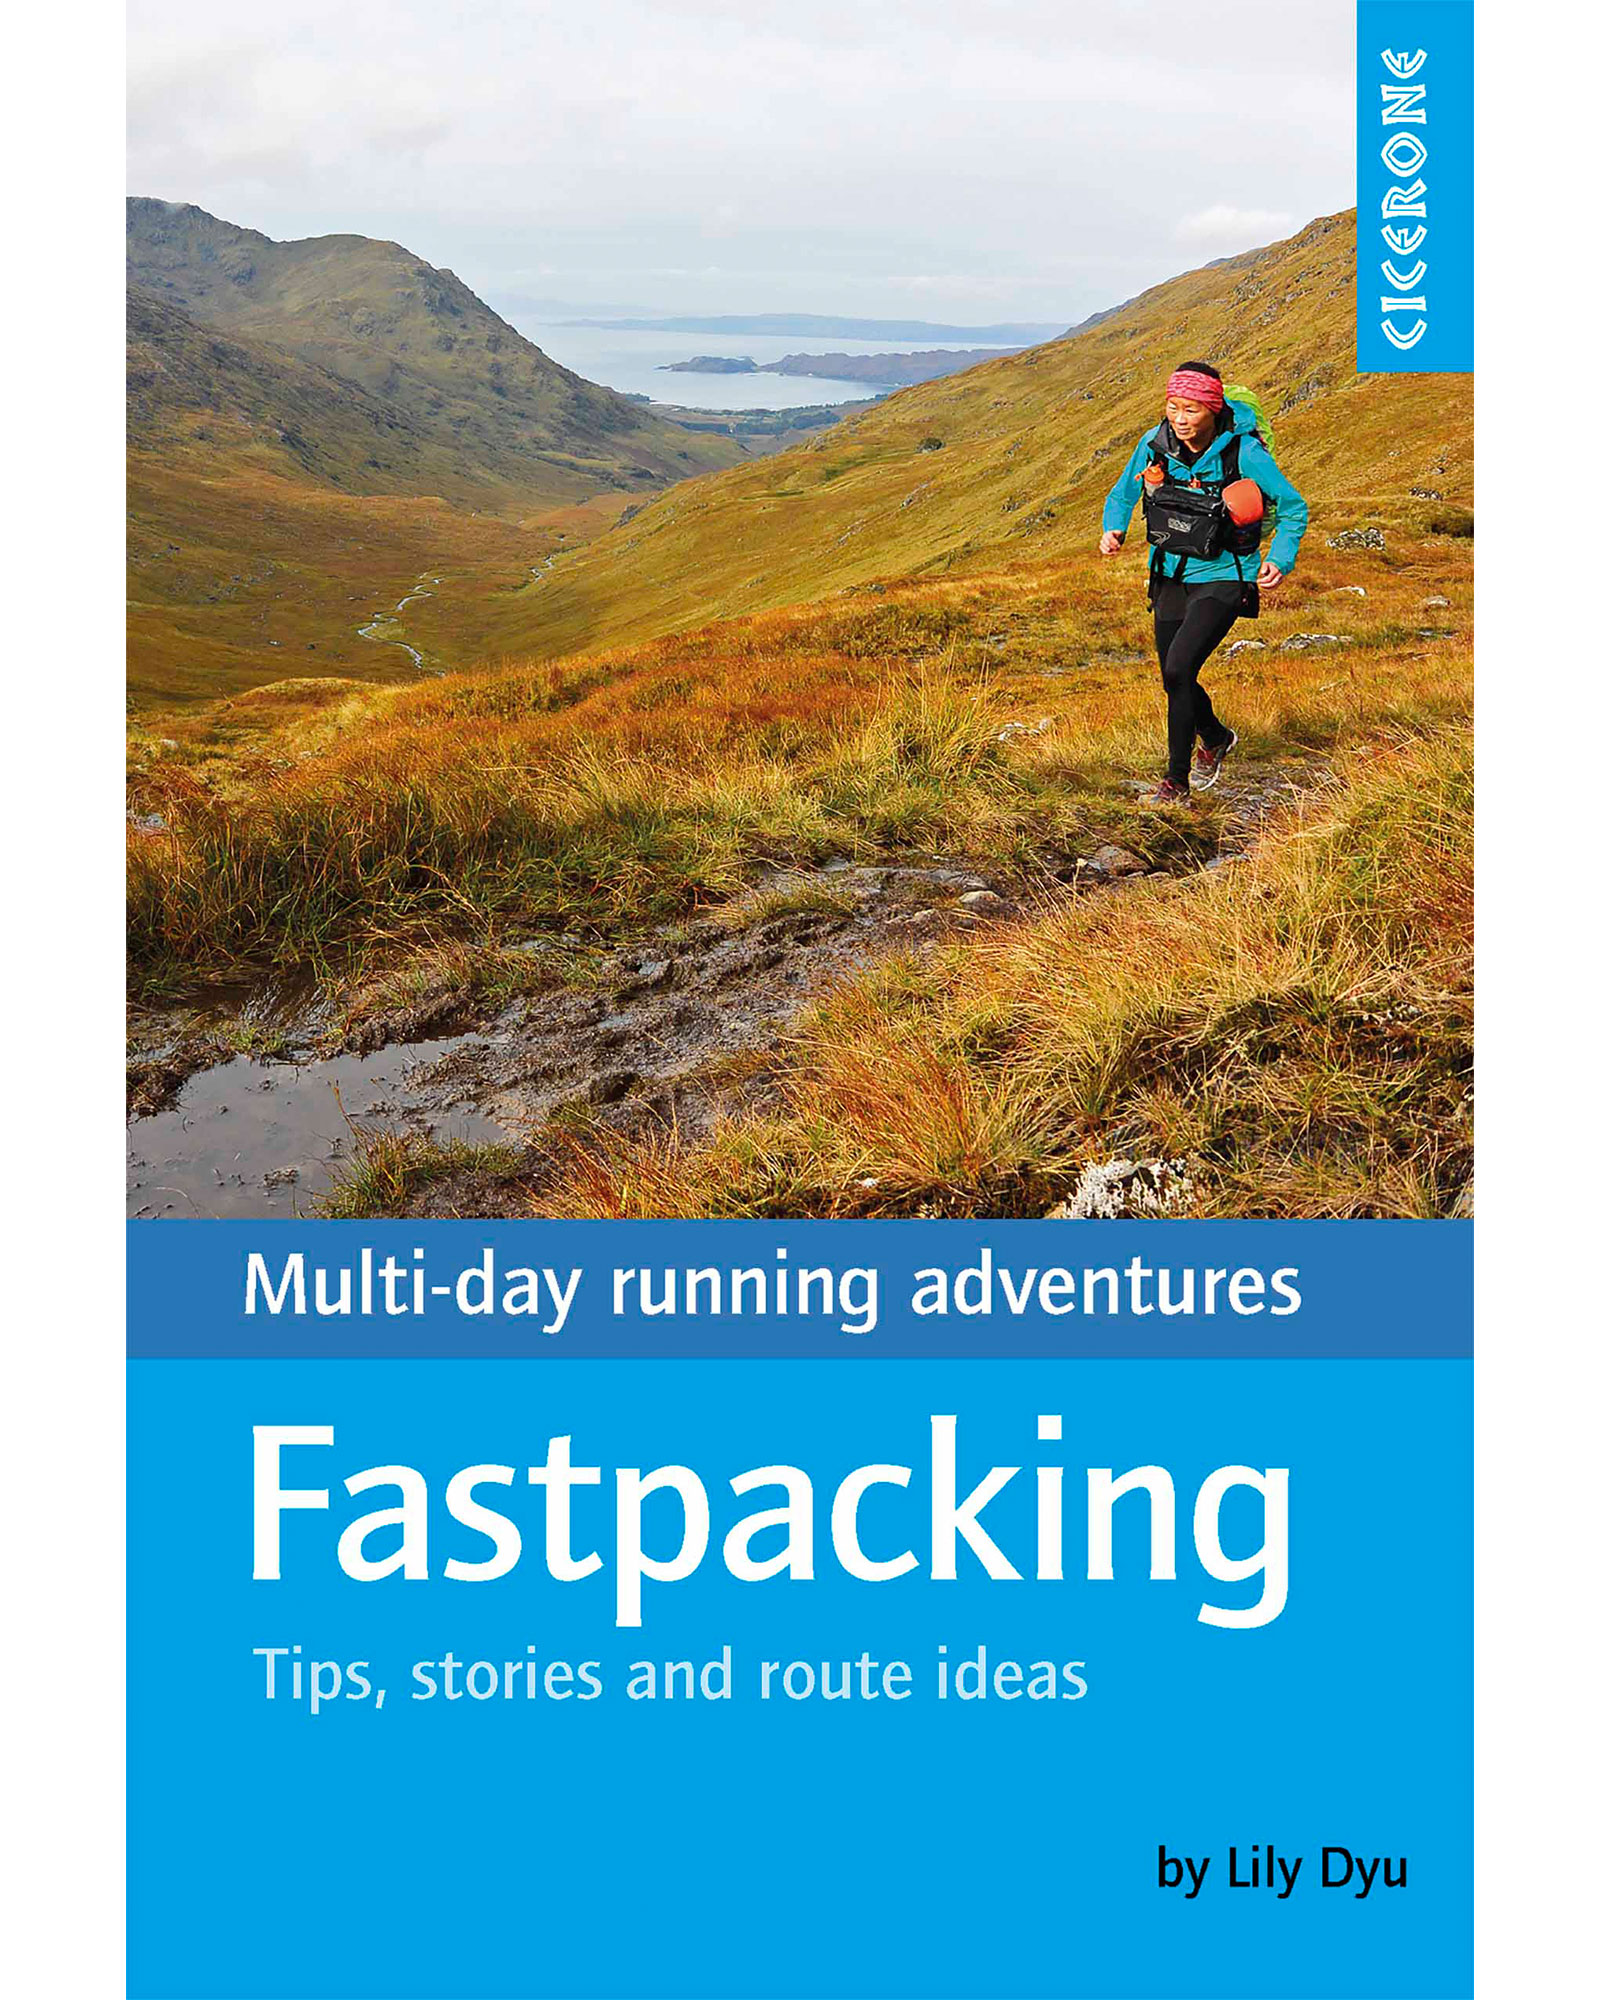 Cicerone Fastpacking Guide Book